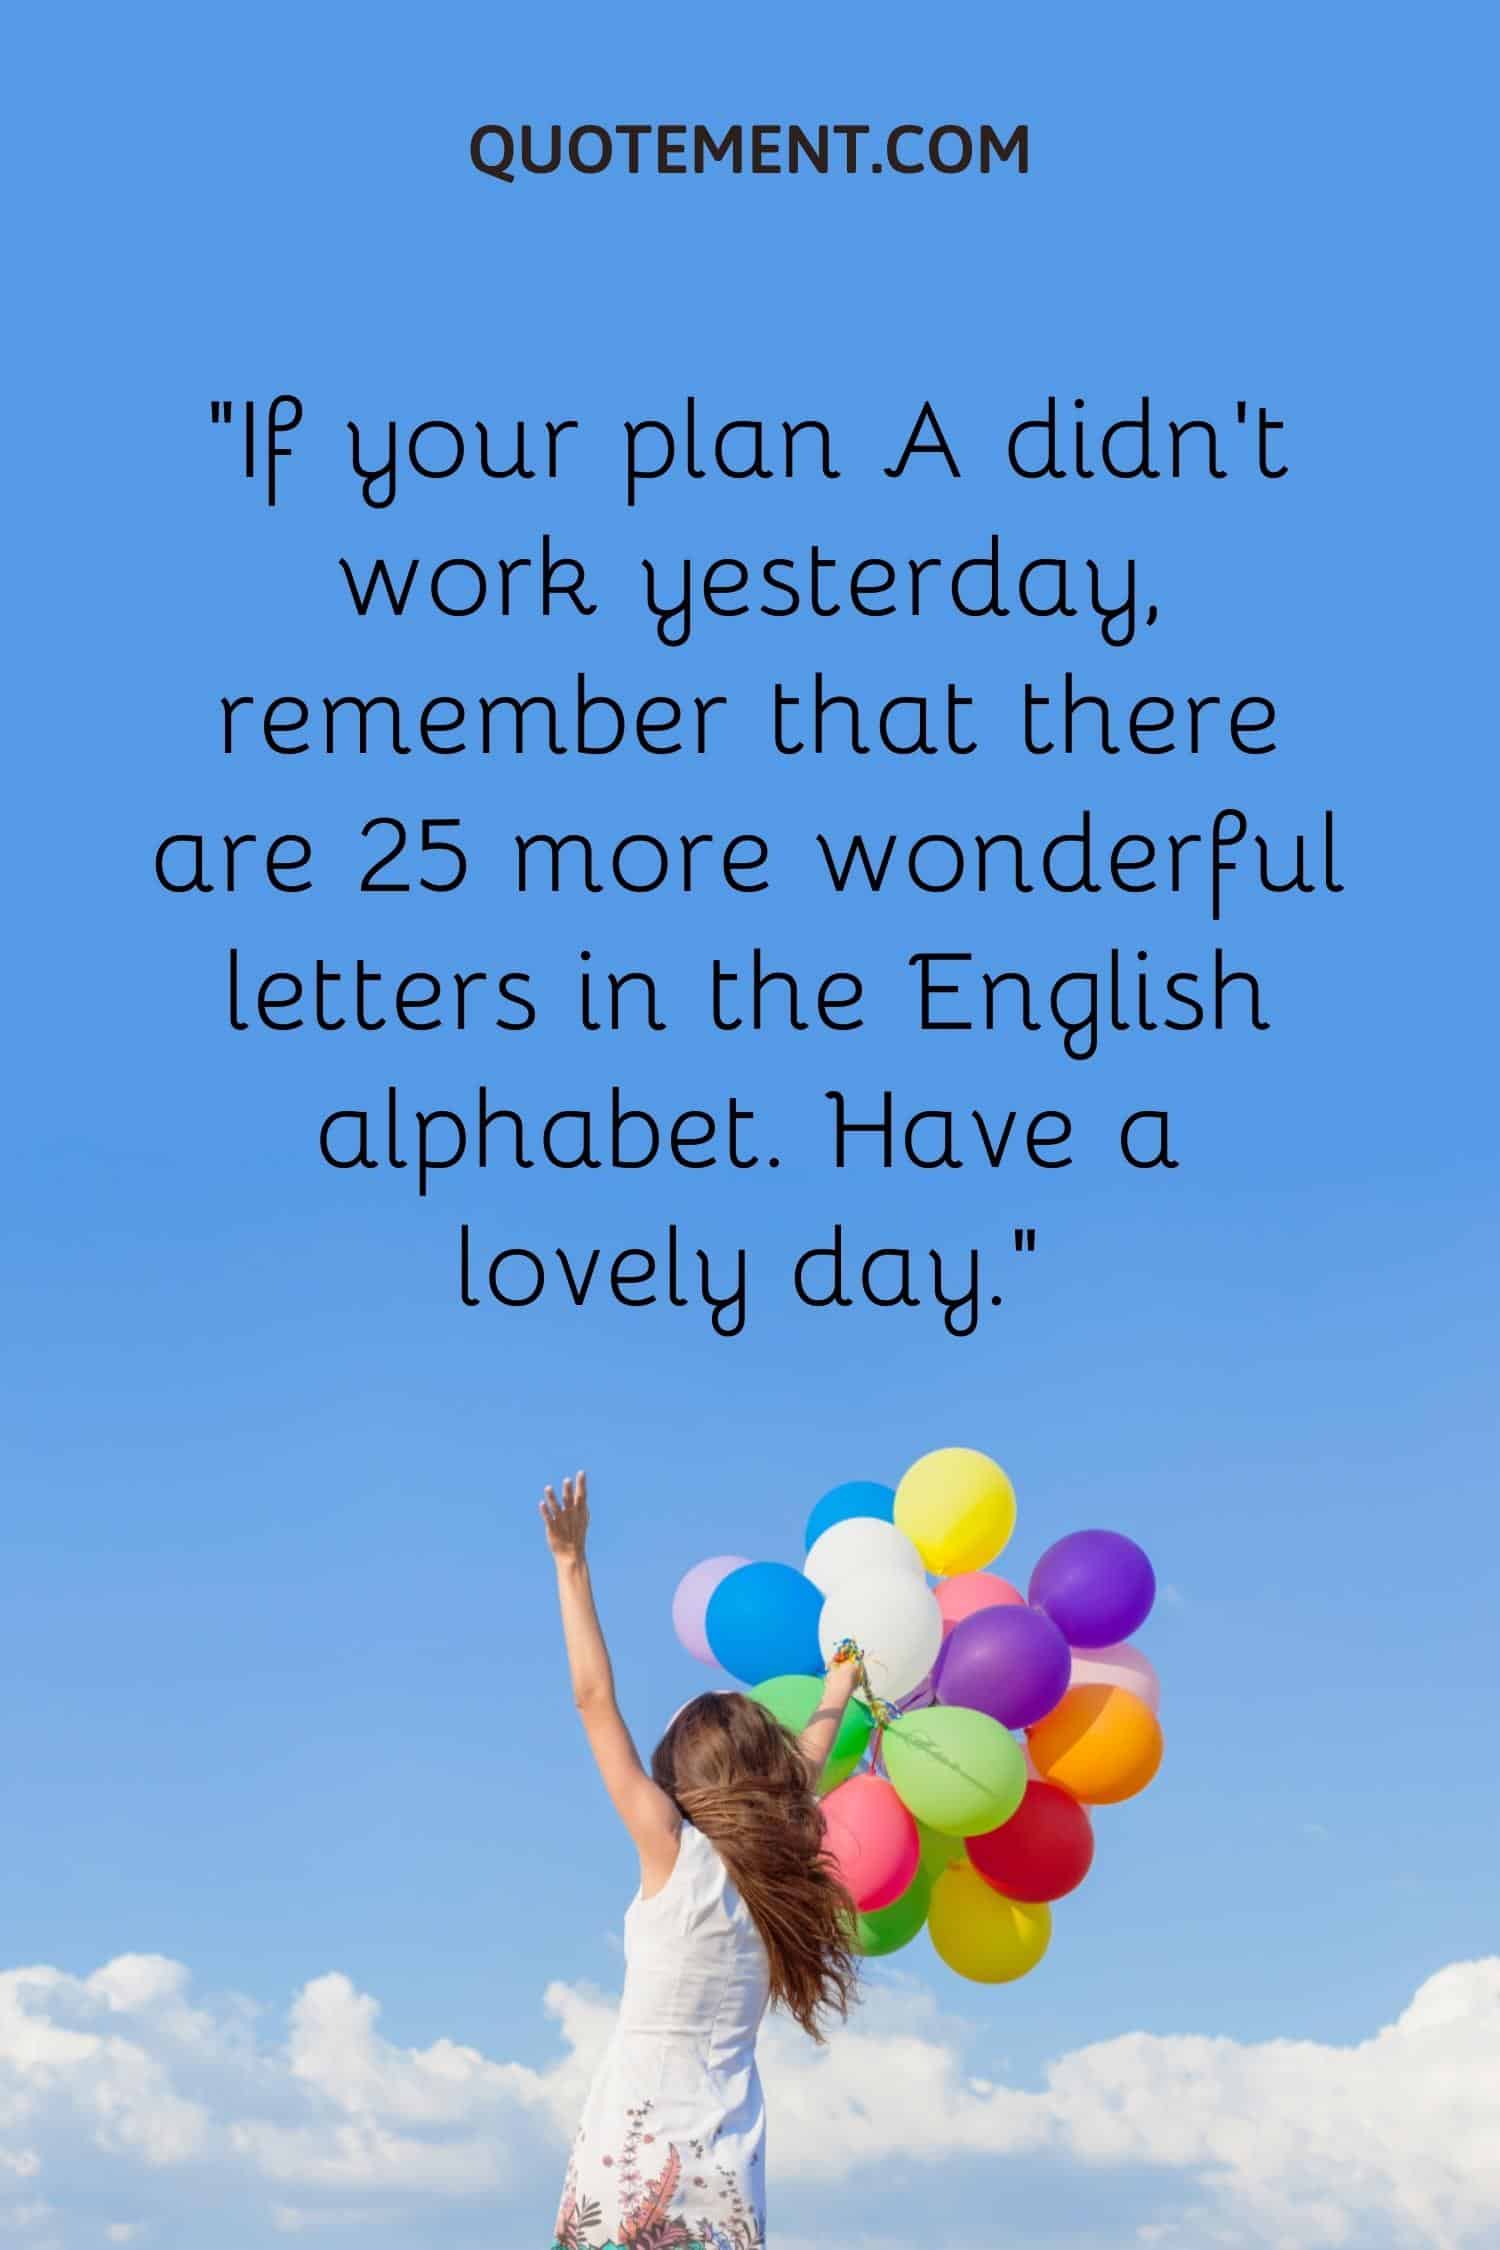 If your plan A didn’t work yesterday, remember that there are 25 more wonderful letters in the English alphabet